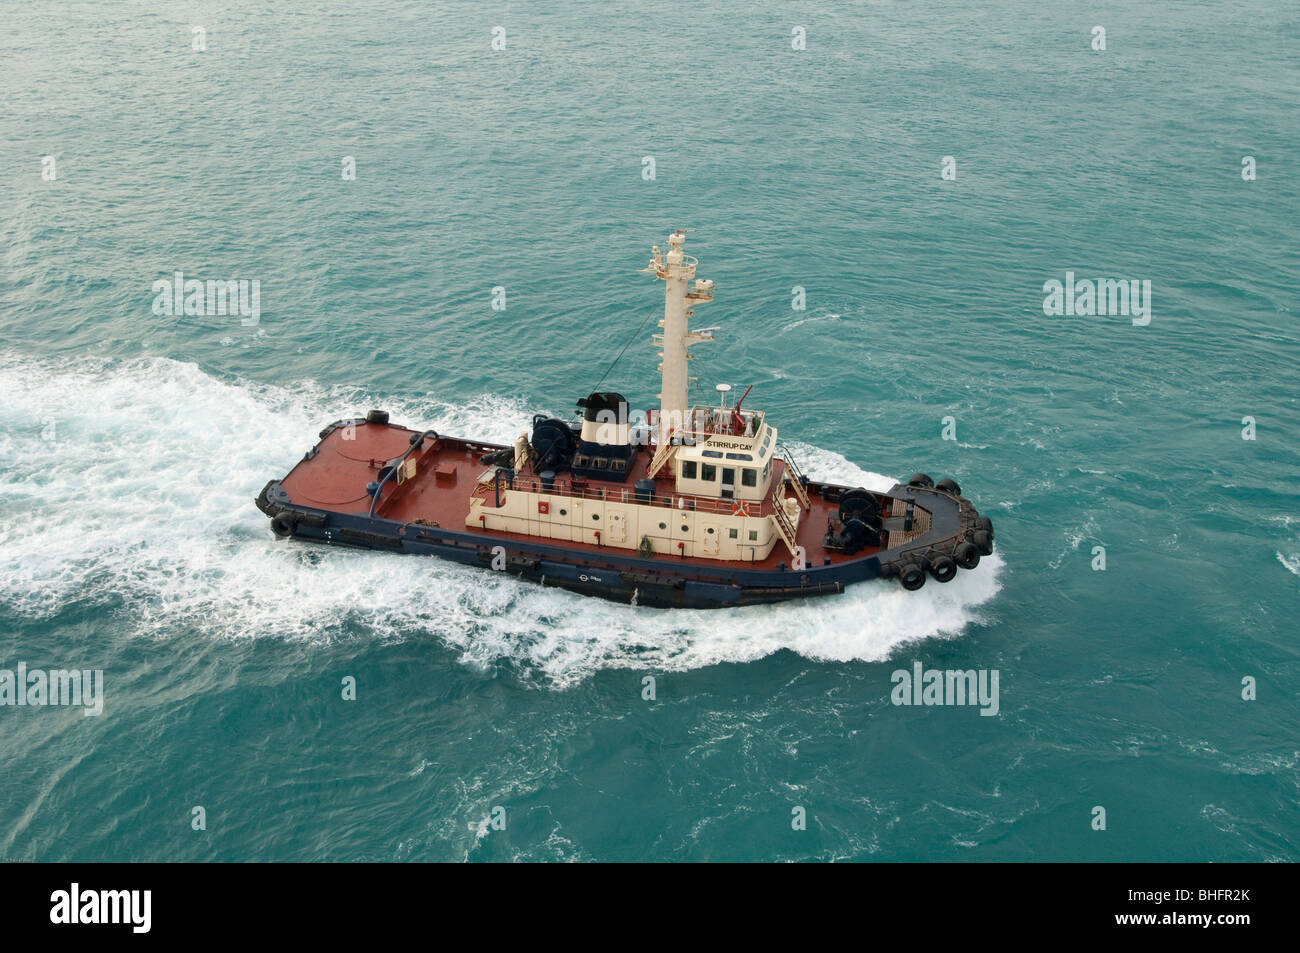 The tugboat 'Stirrup Cay' motors through through the water to provide harbor assistance to an ocean going cargo boat. Stock Photo